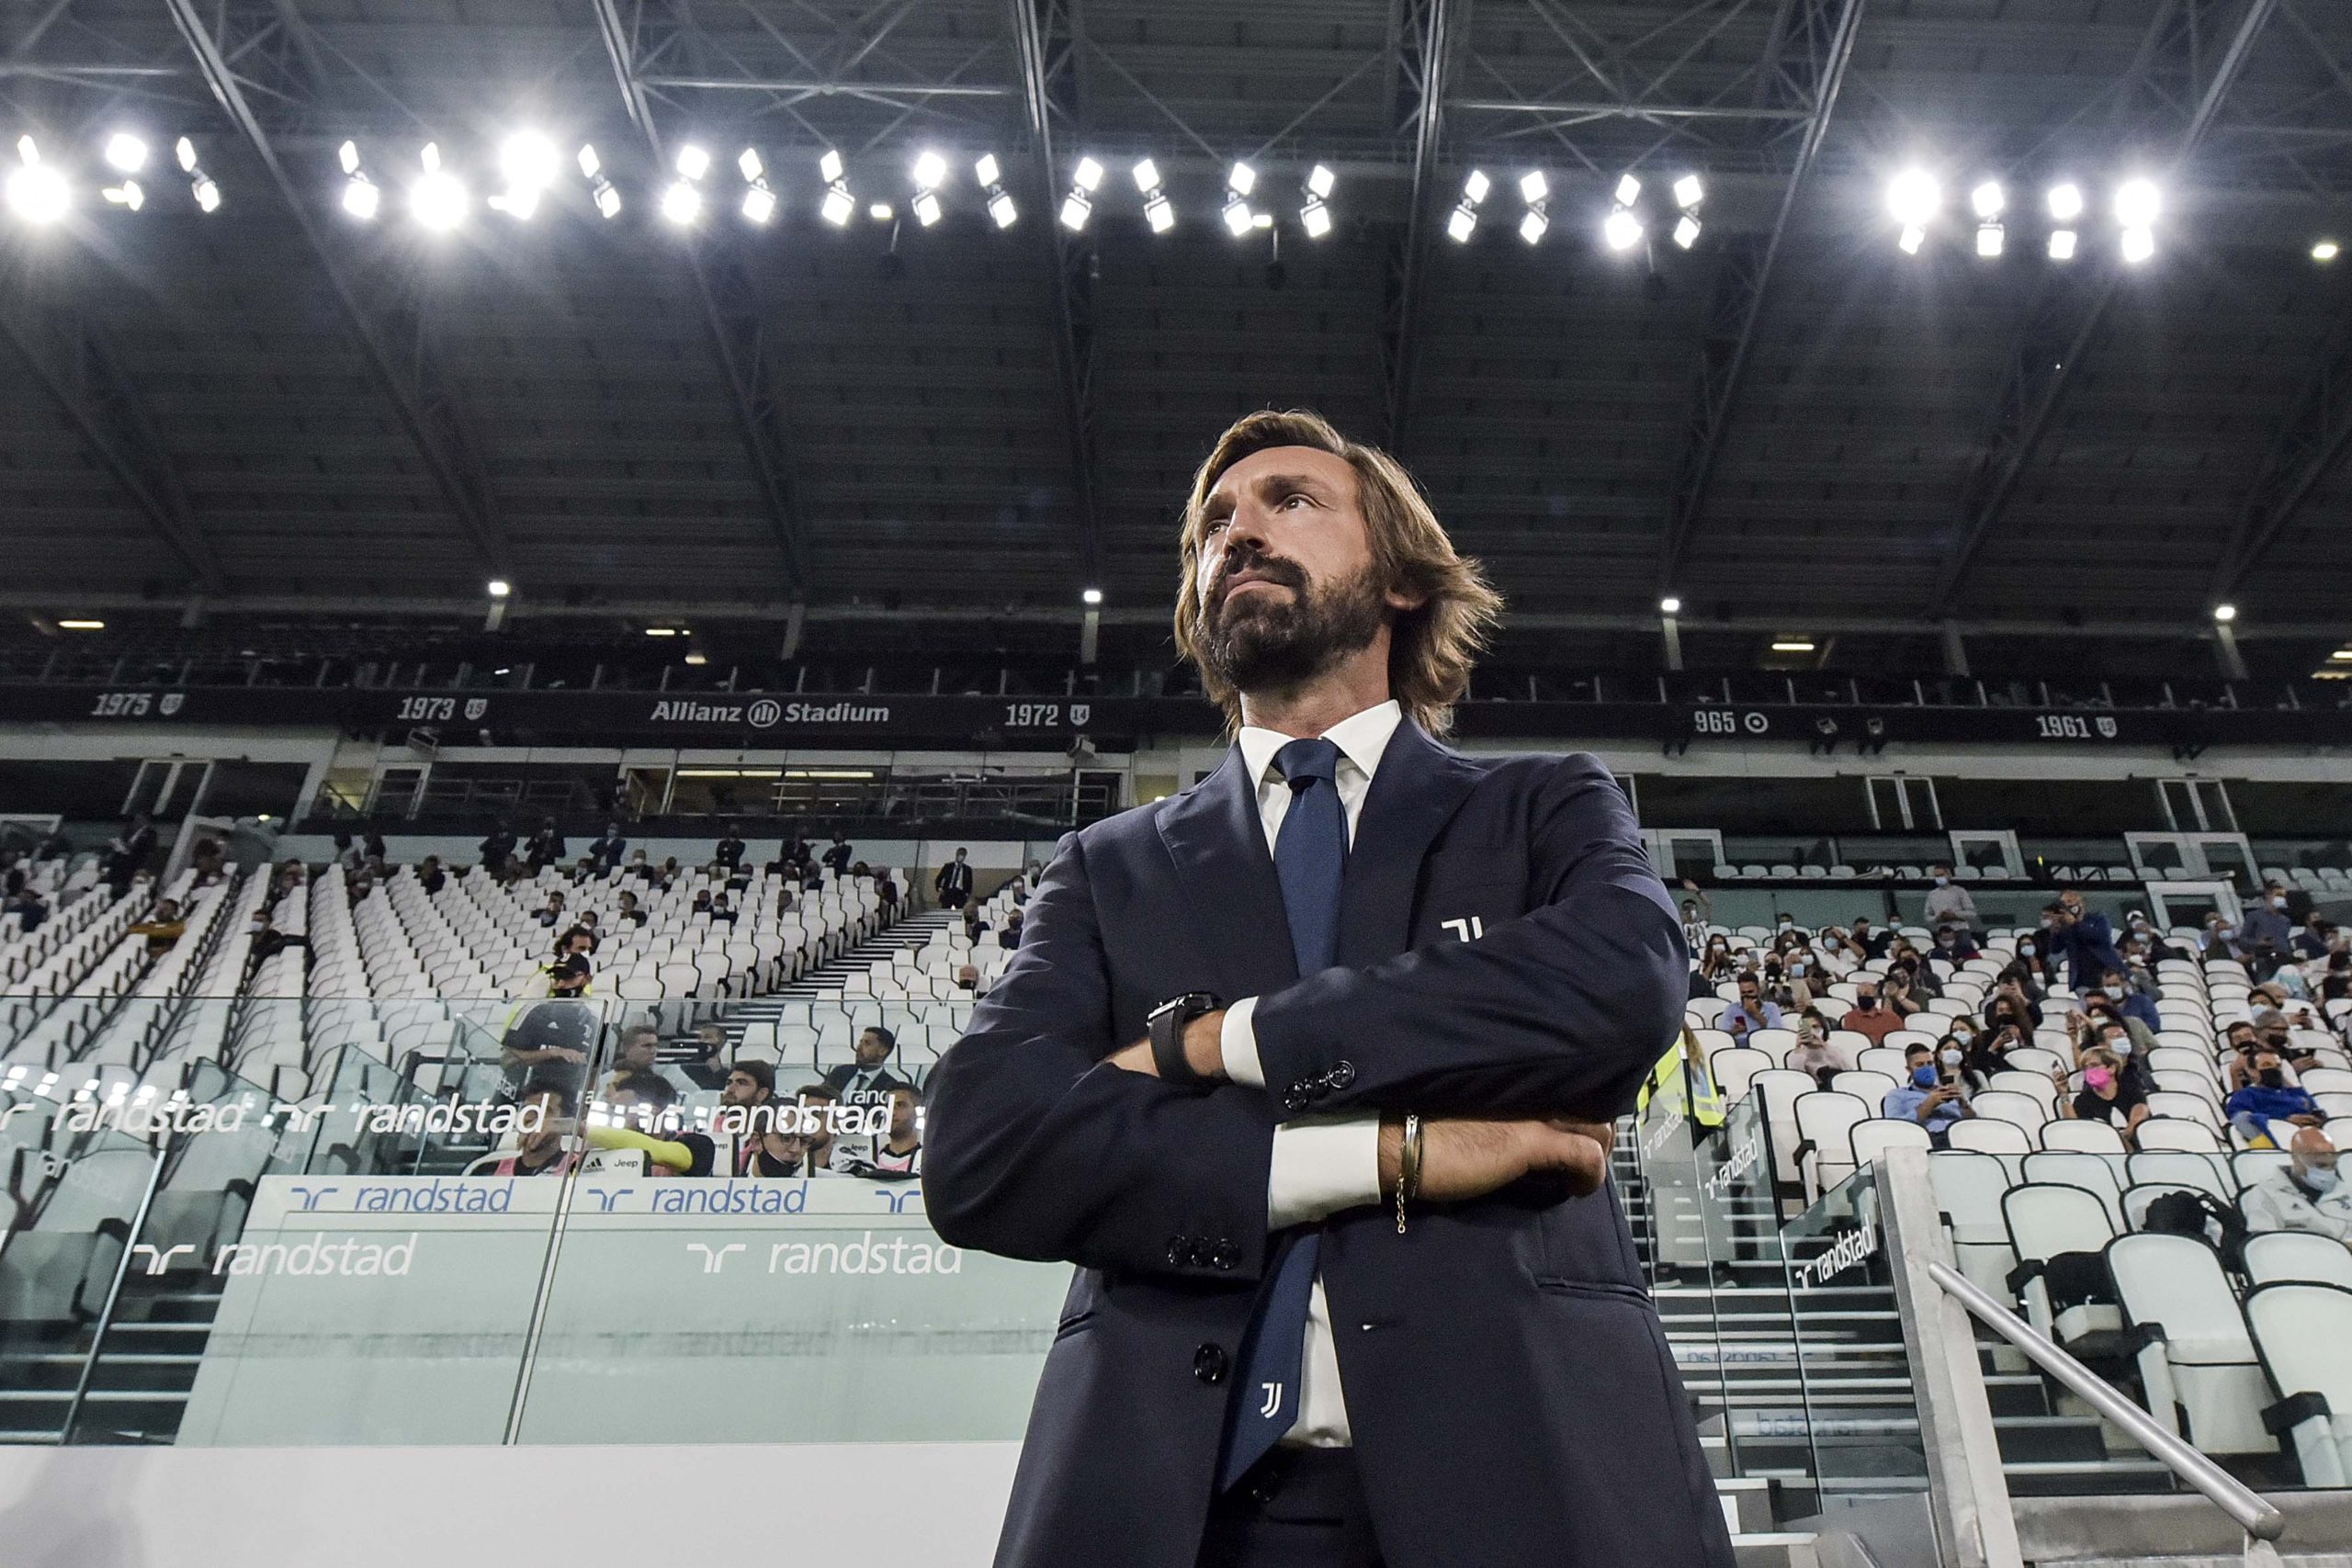 Former Azzurri teammates Inzaghi and Pirlo came face-to-face in the Coppa Italia on Monday night, as the former beat the latter by an overwhelming scoreline